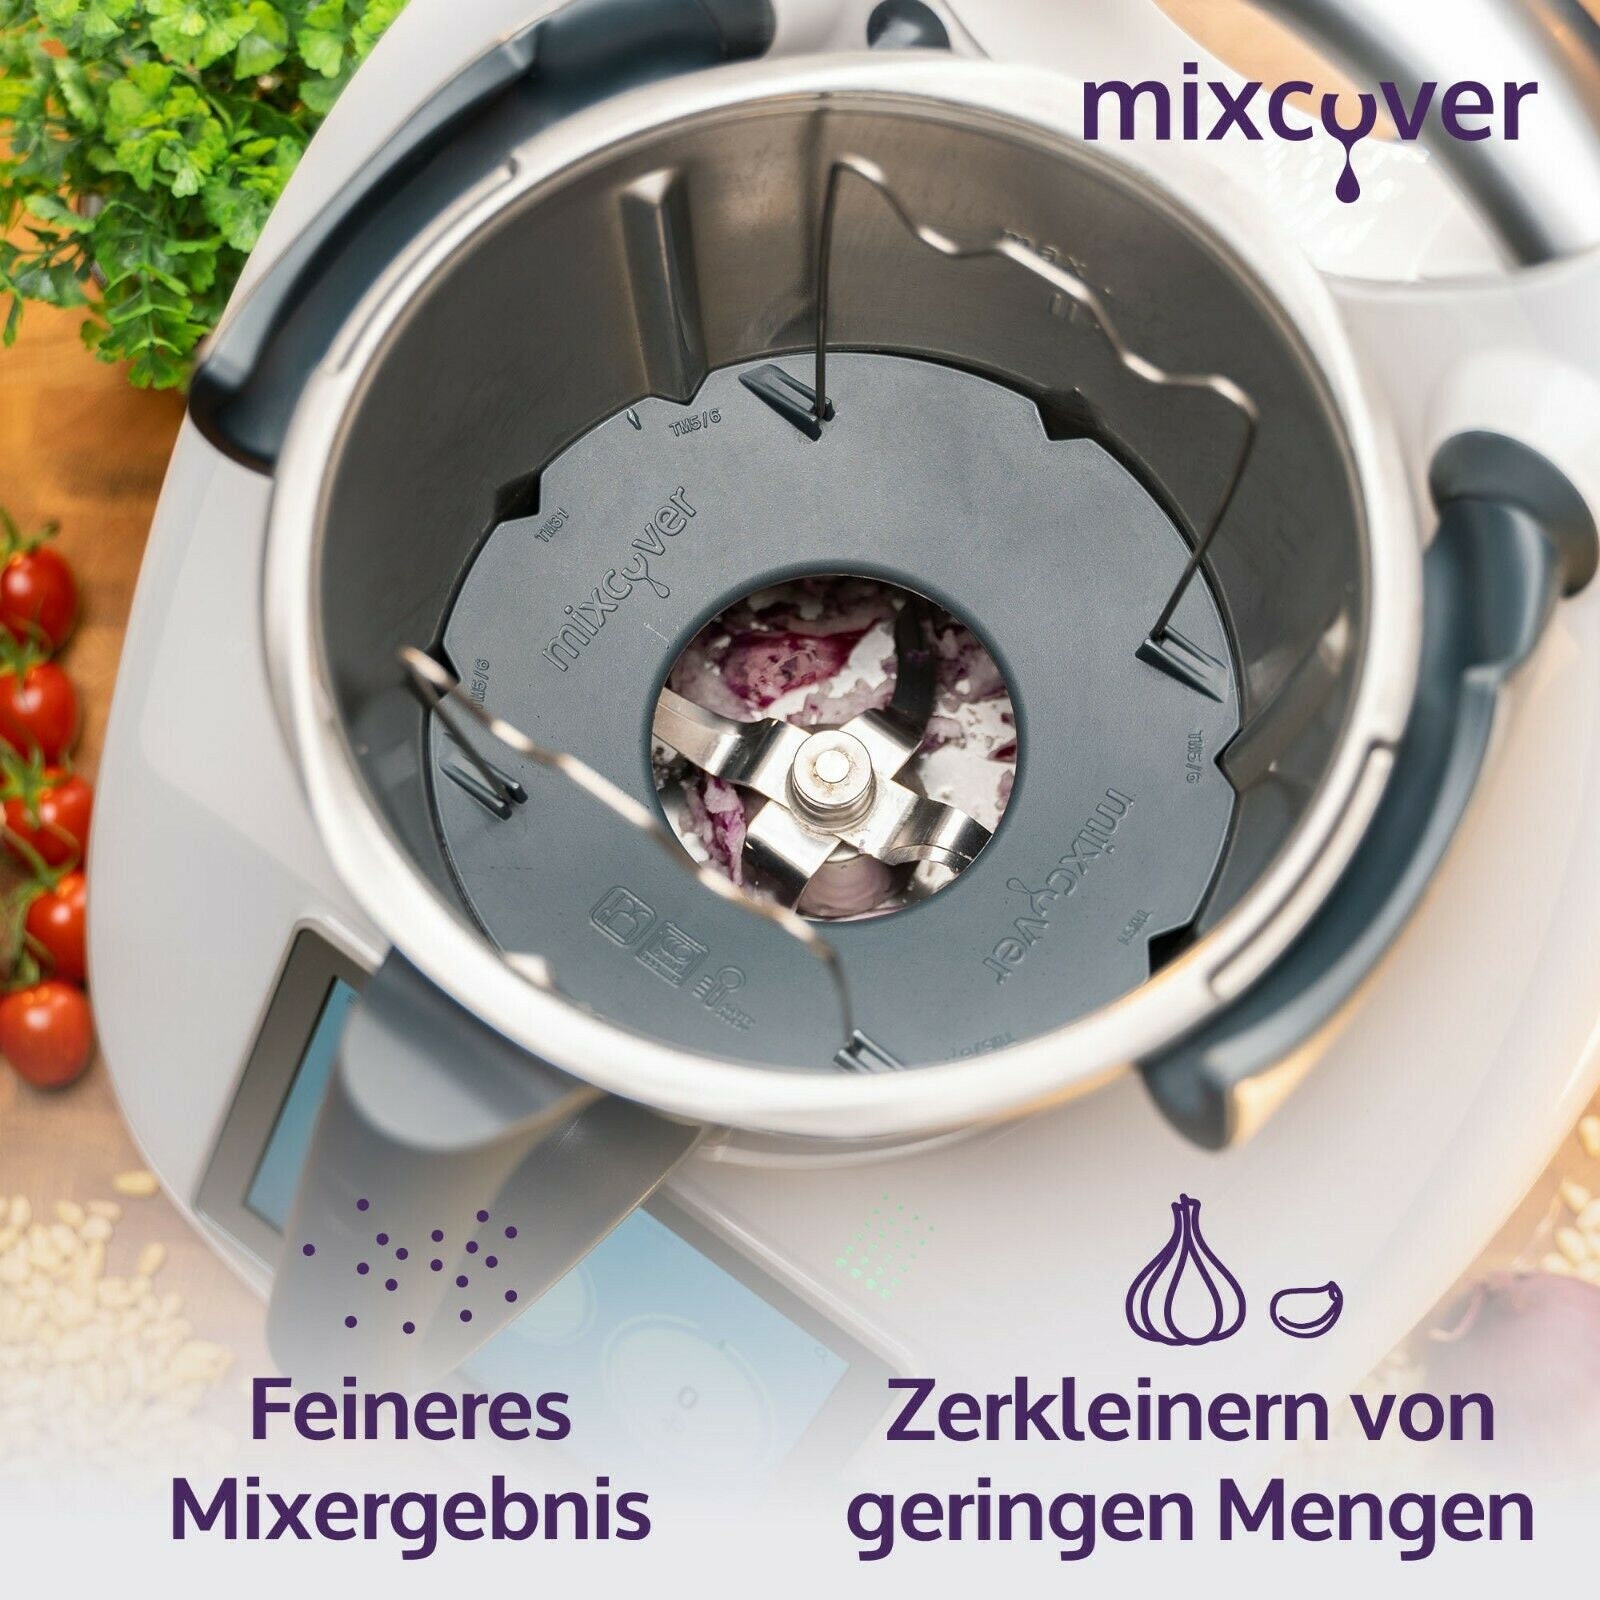 mixcover mixing pot reduction for Thermomix TM6 TM5 chopping